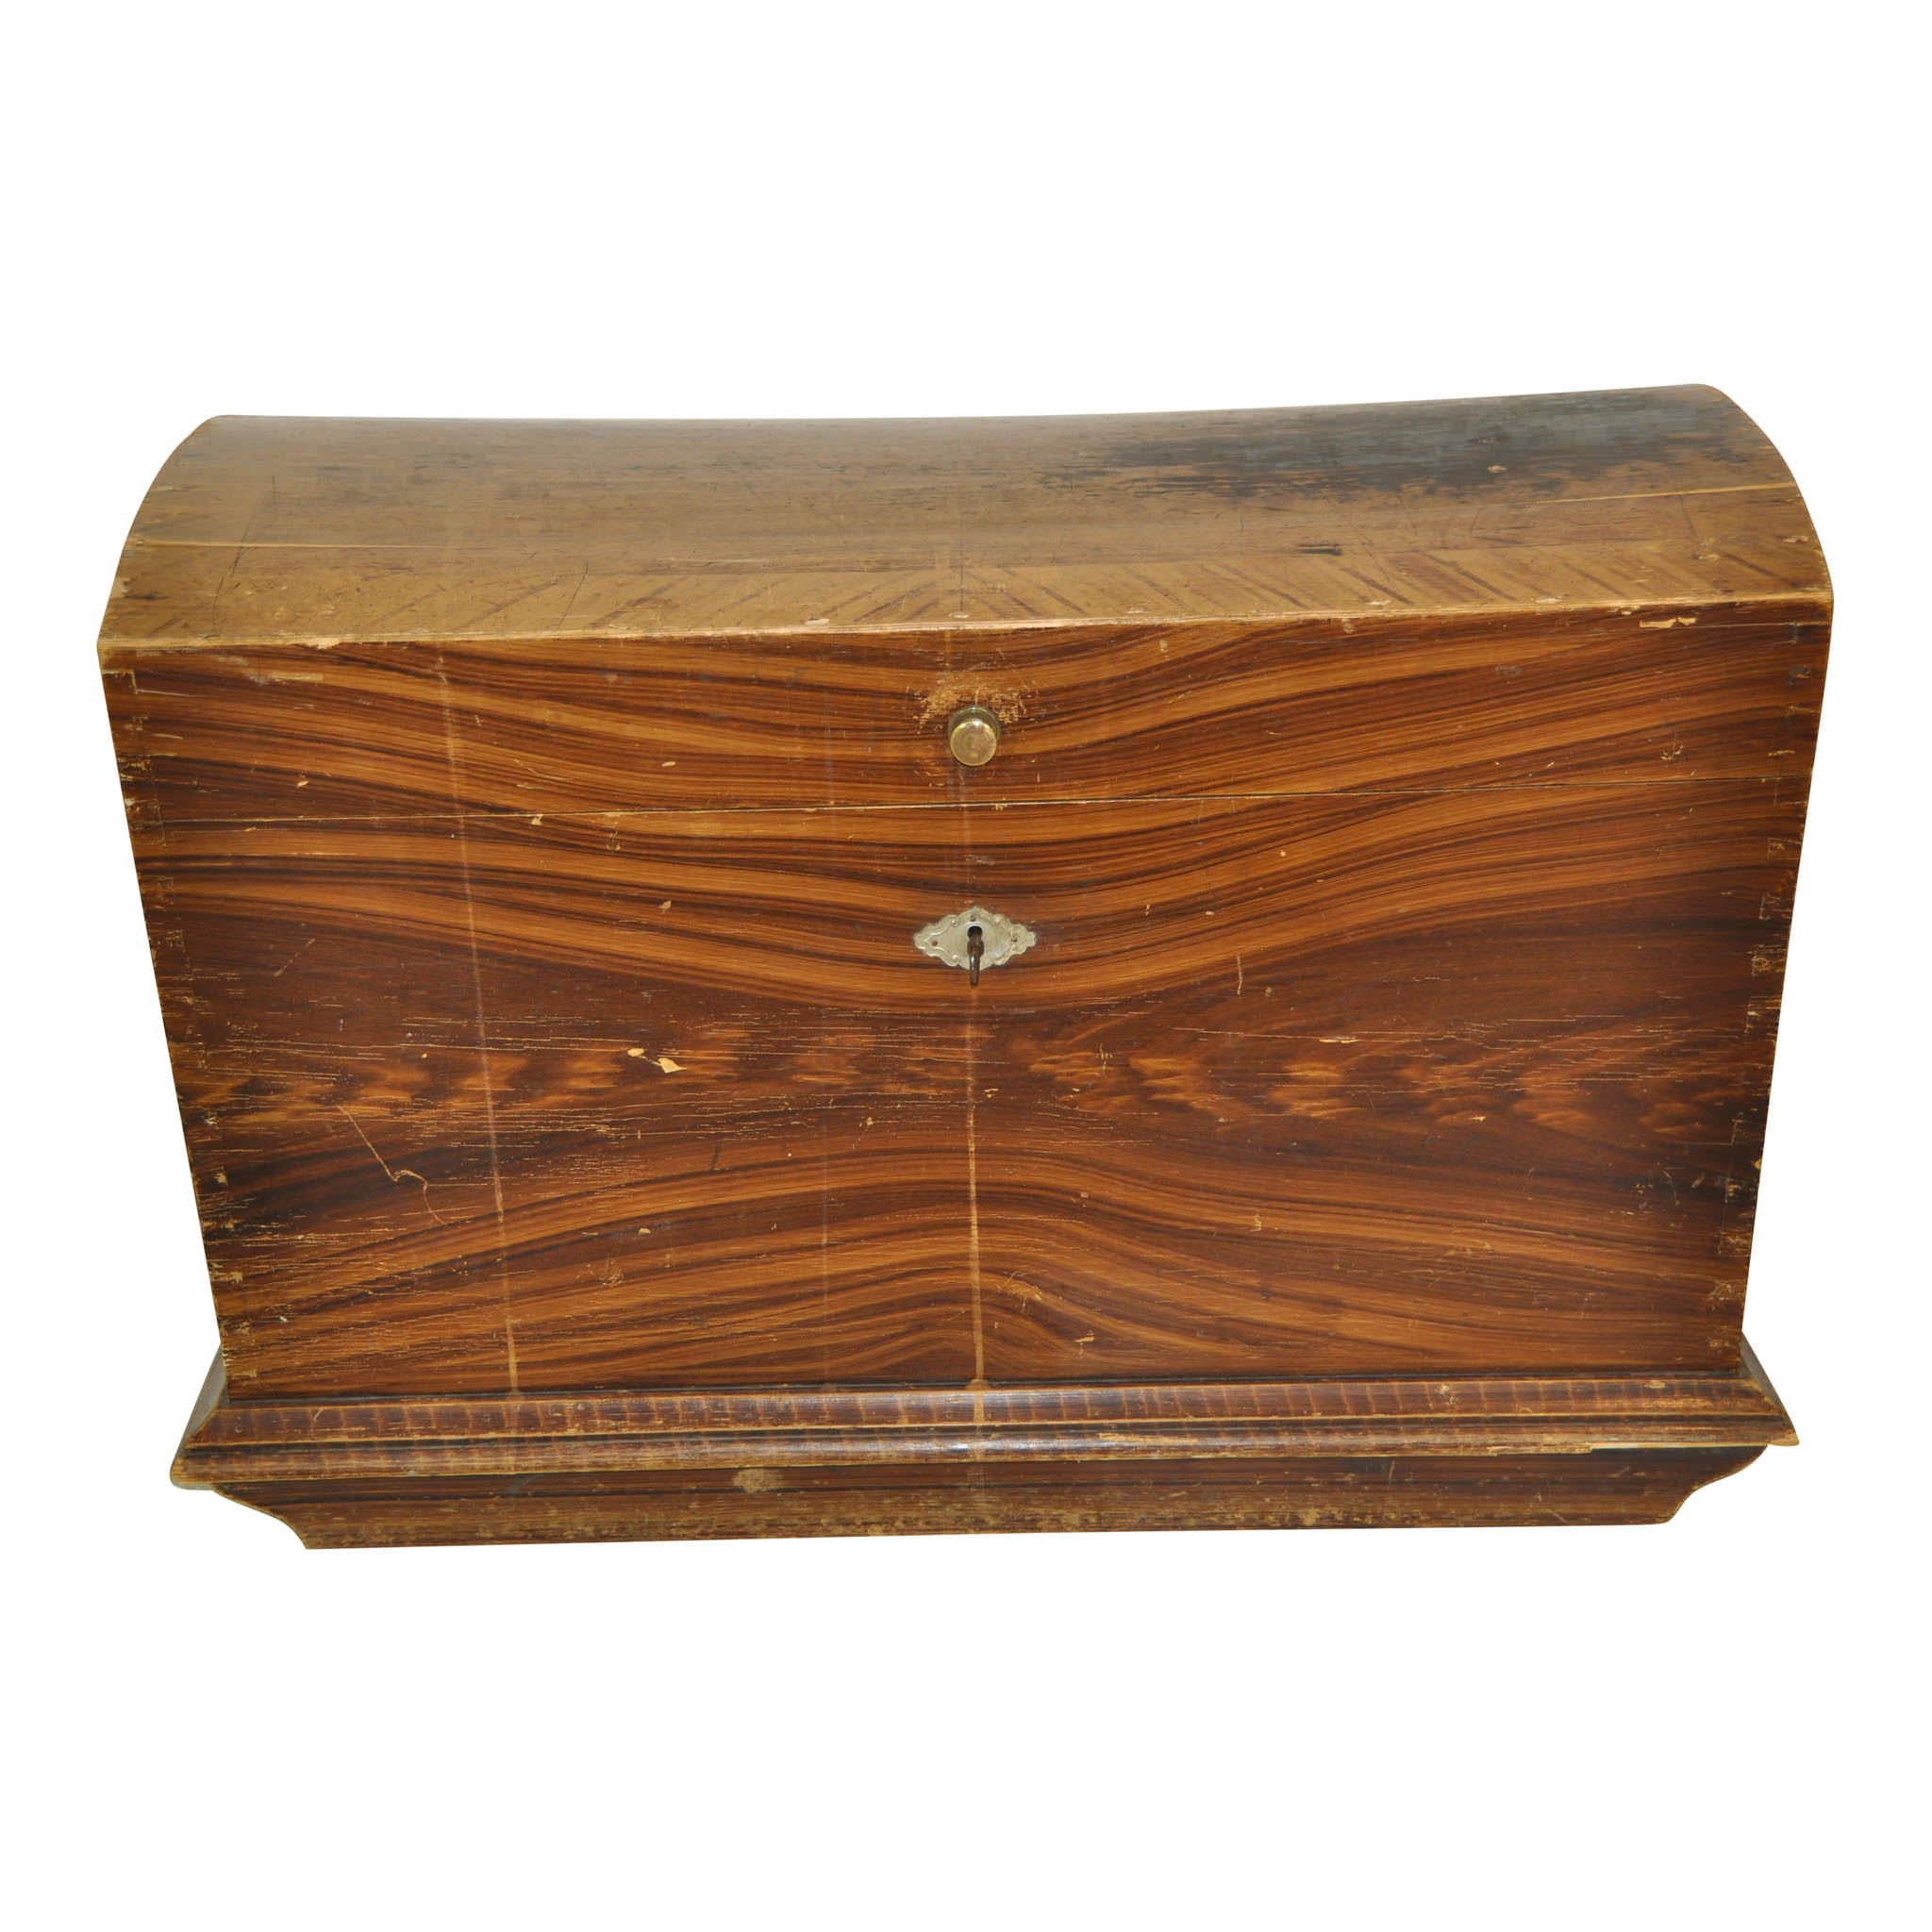 Grain Painted Trunk with Curved Top